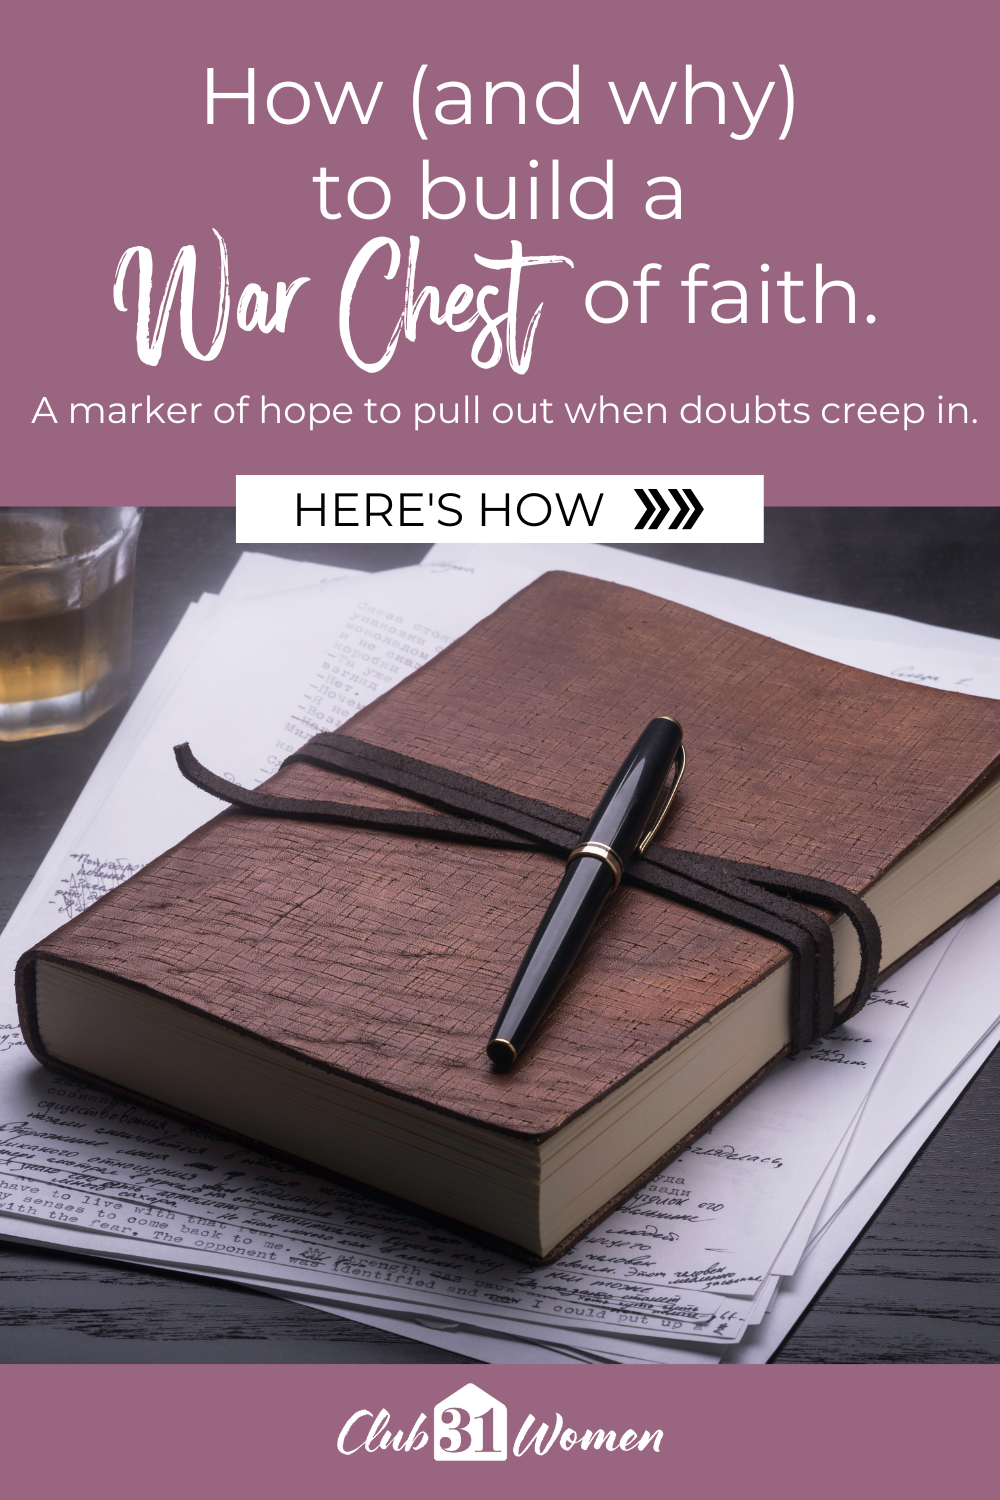 Unlock the power of unwavering faith! Learn to build your own 'war chest of faith' and discover how to navigate doubts with confidence. via @Club31Women